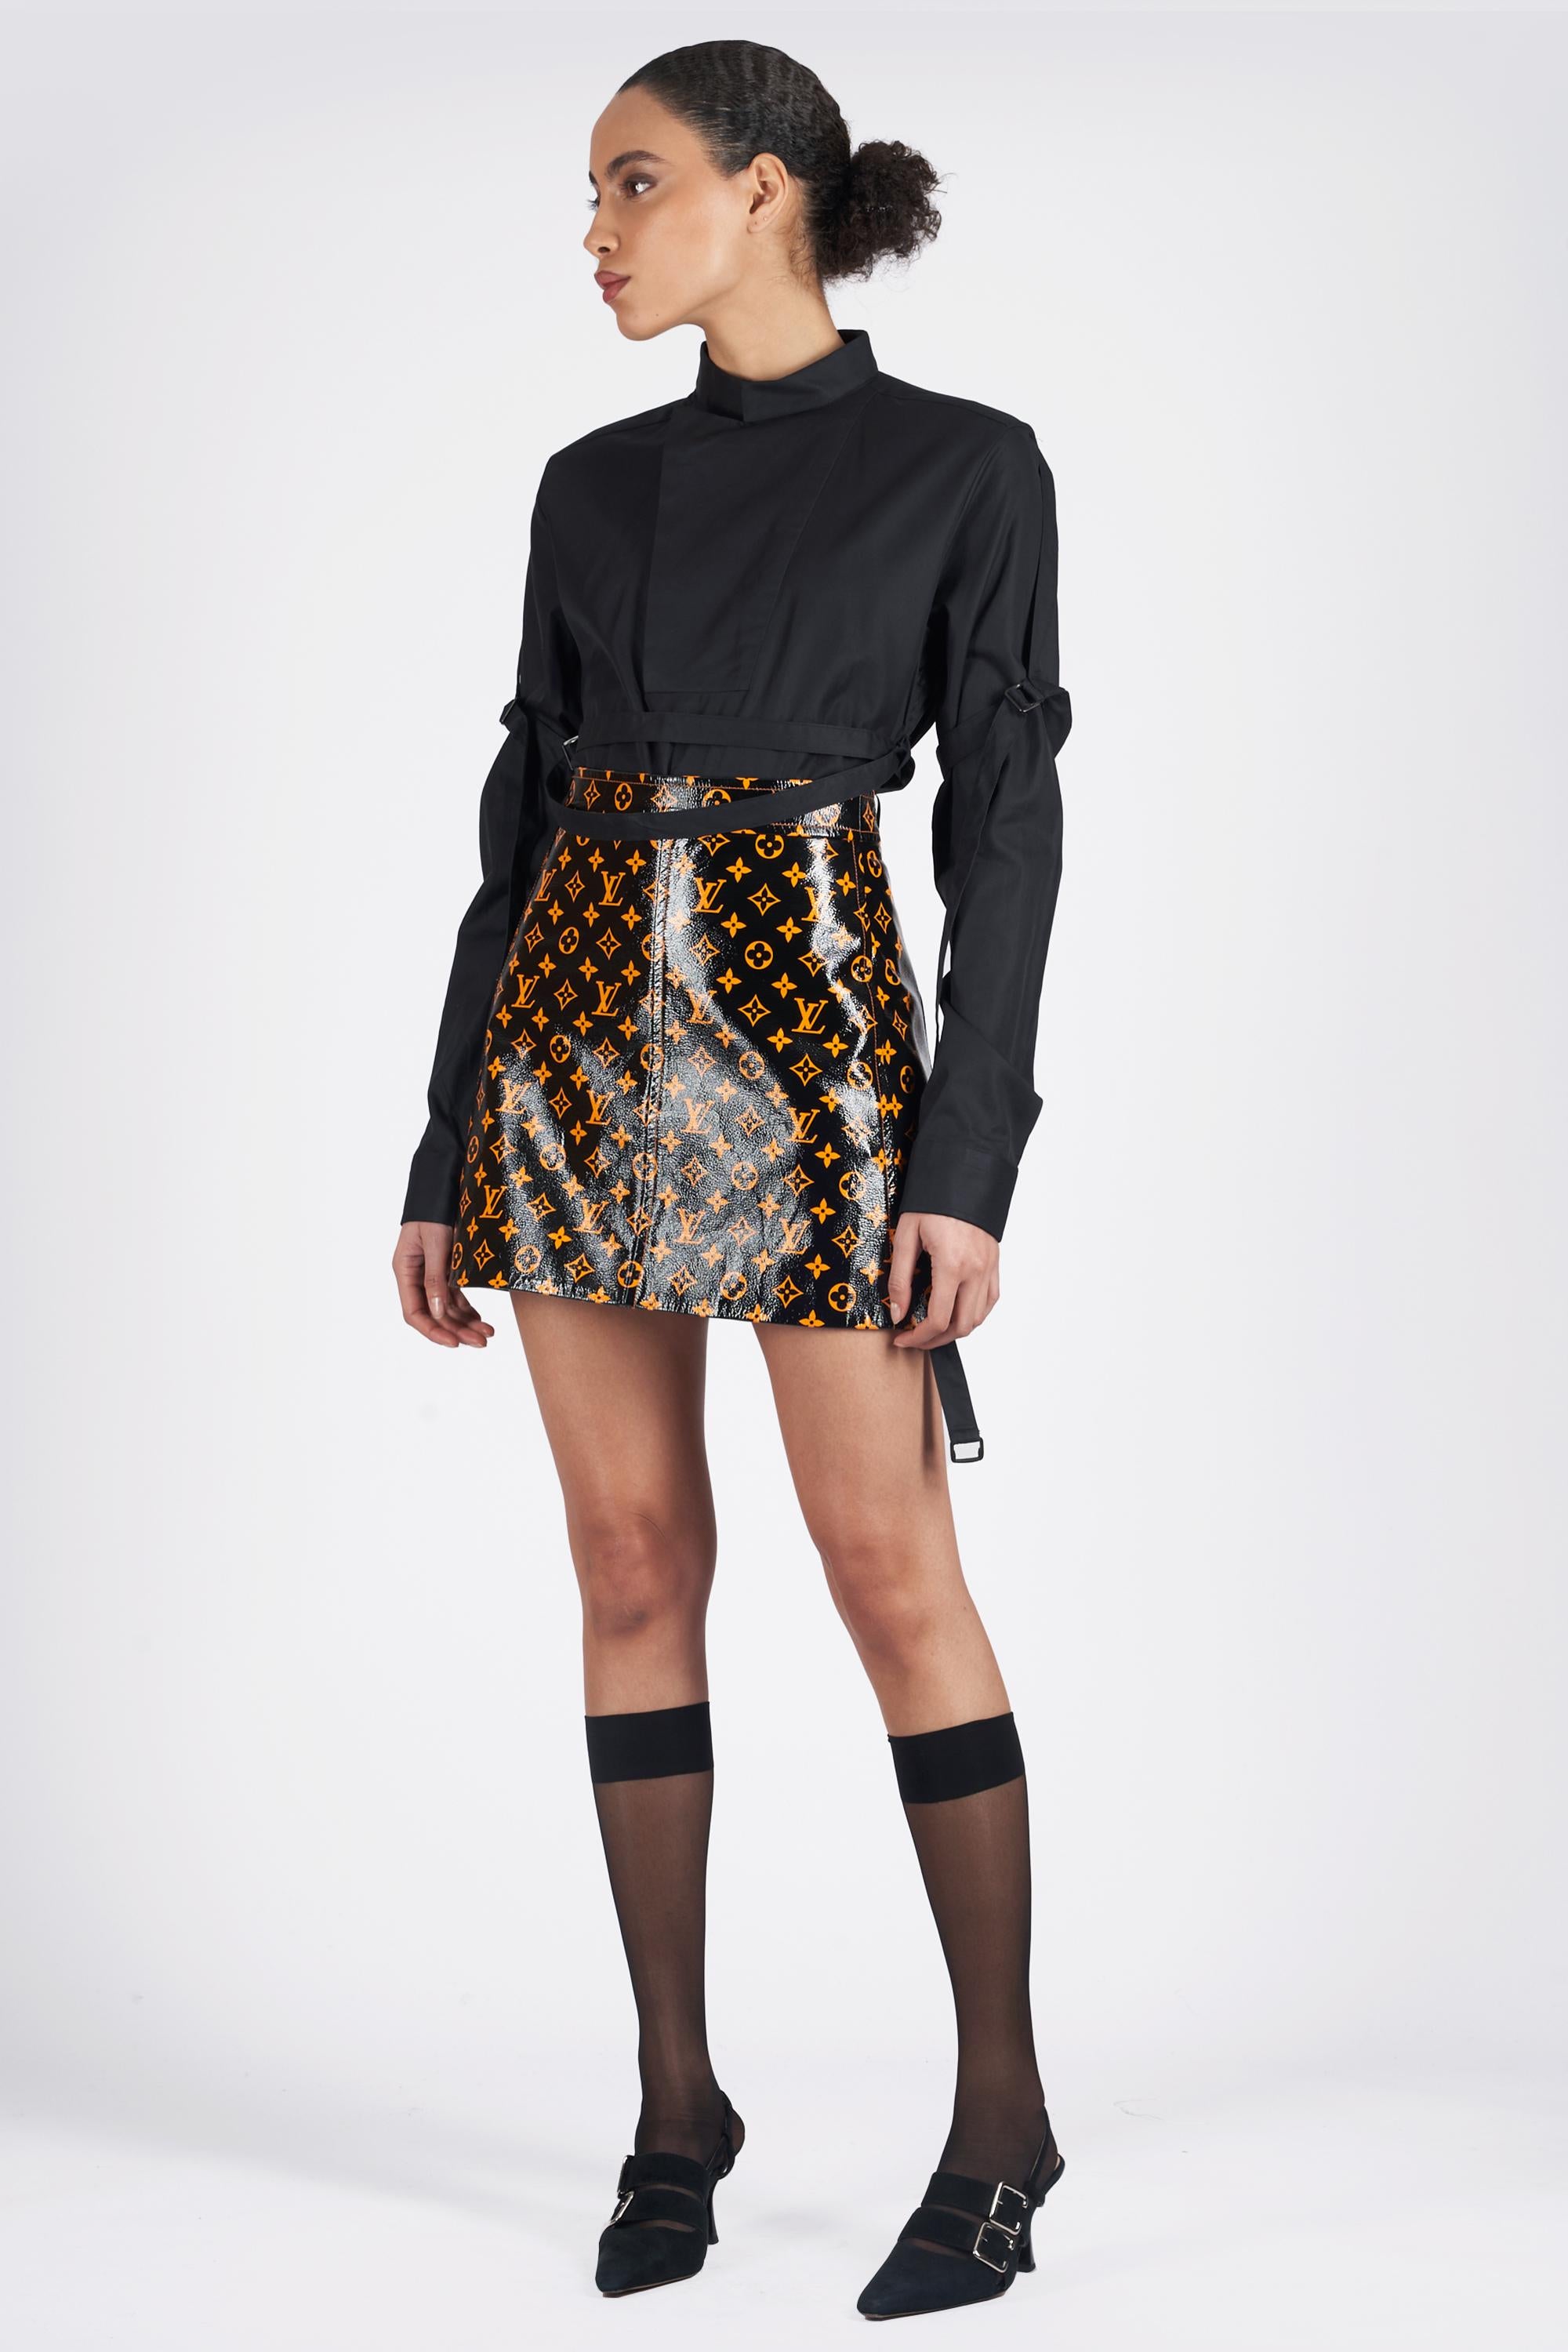 Black Louis Vuitton 2020 Leather Printed Monogram Skirt For Sale